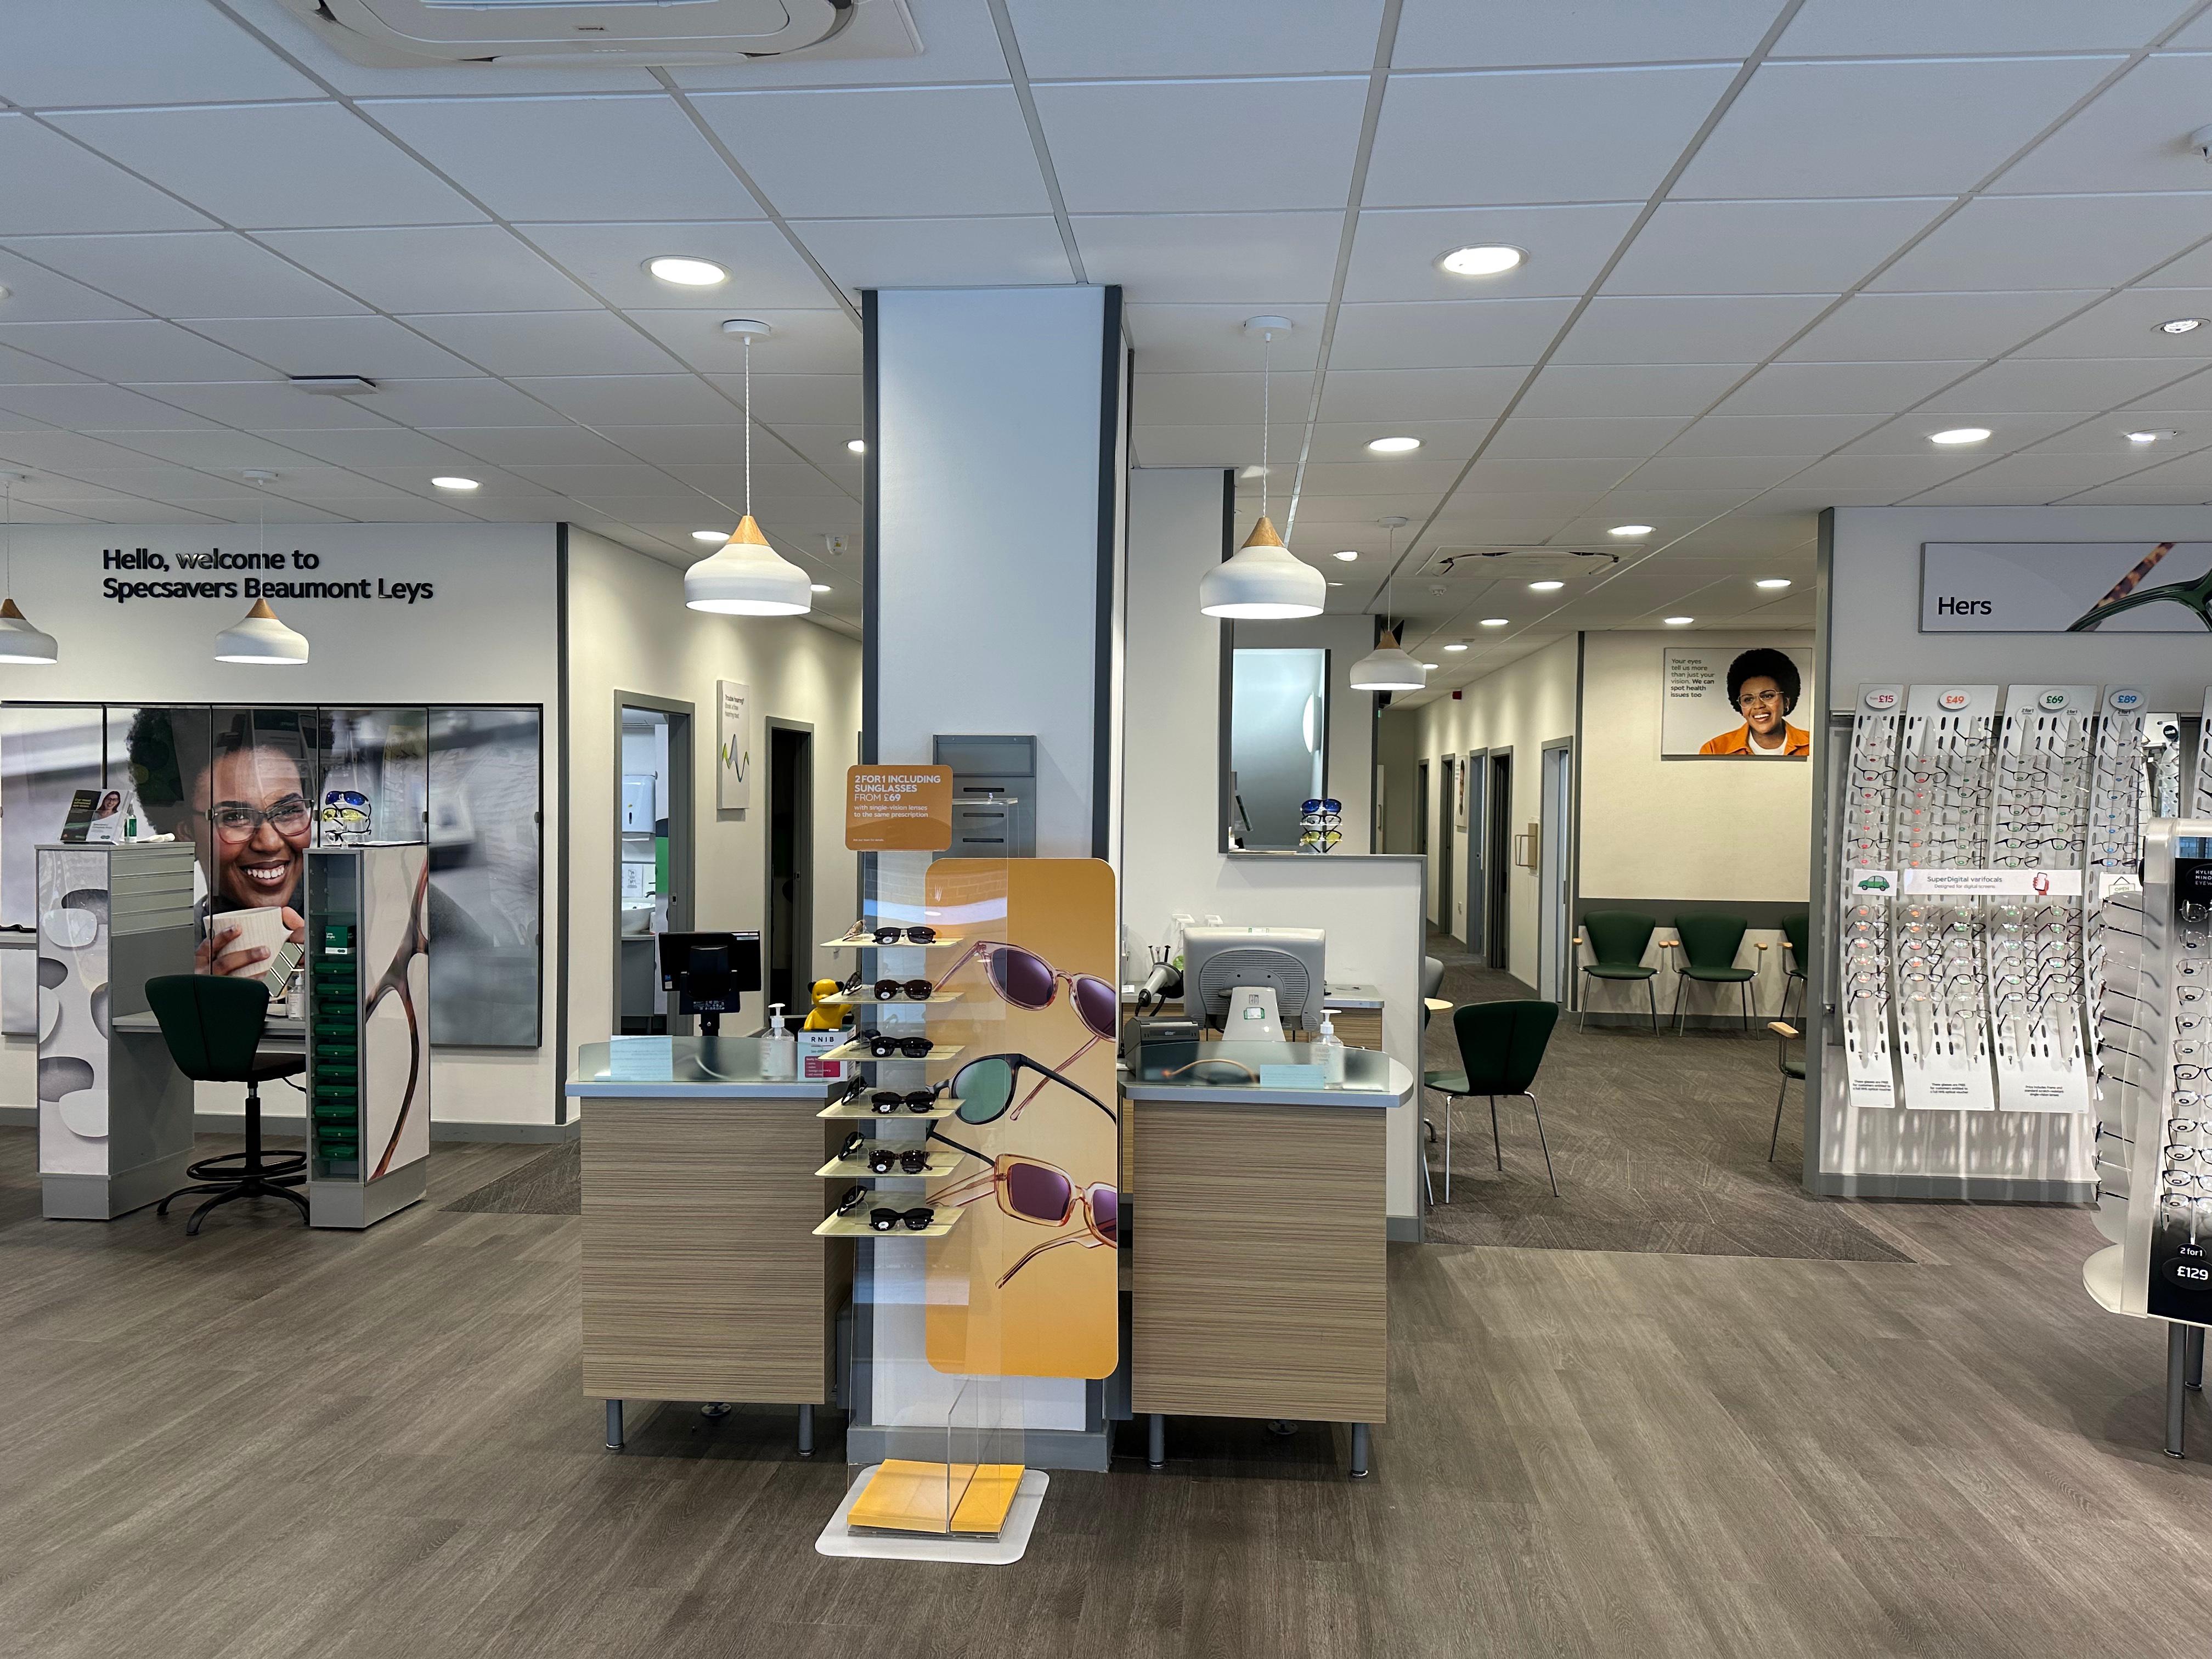 Images Specsavers Opticians and Audiologists - Beaumont Leys